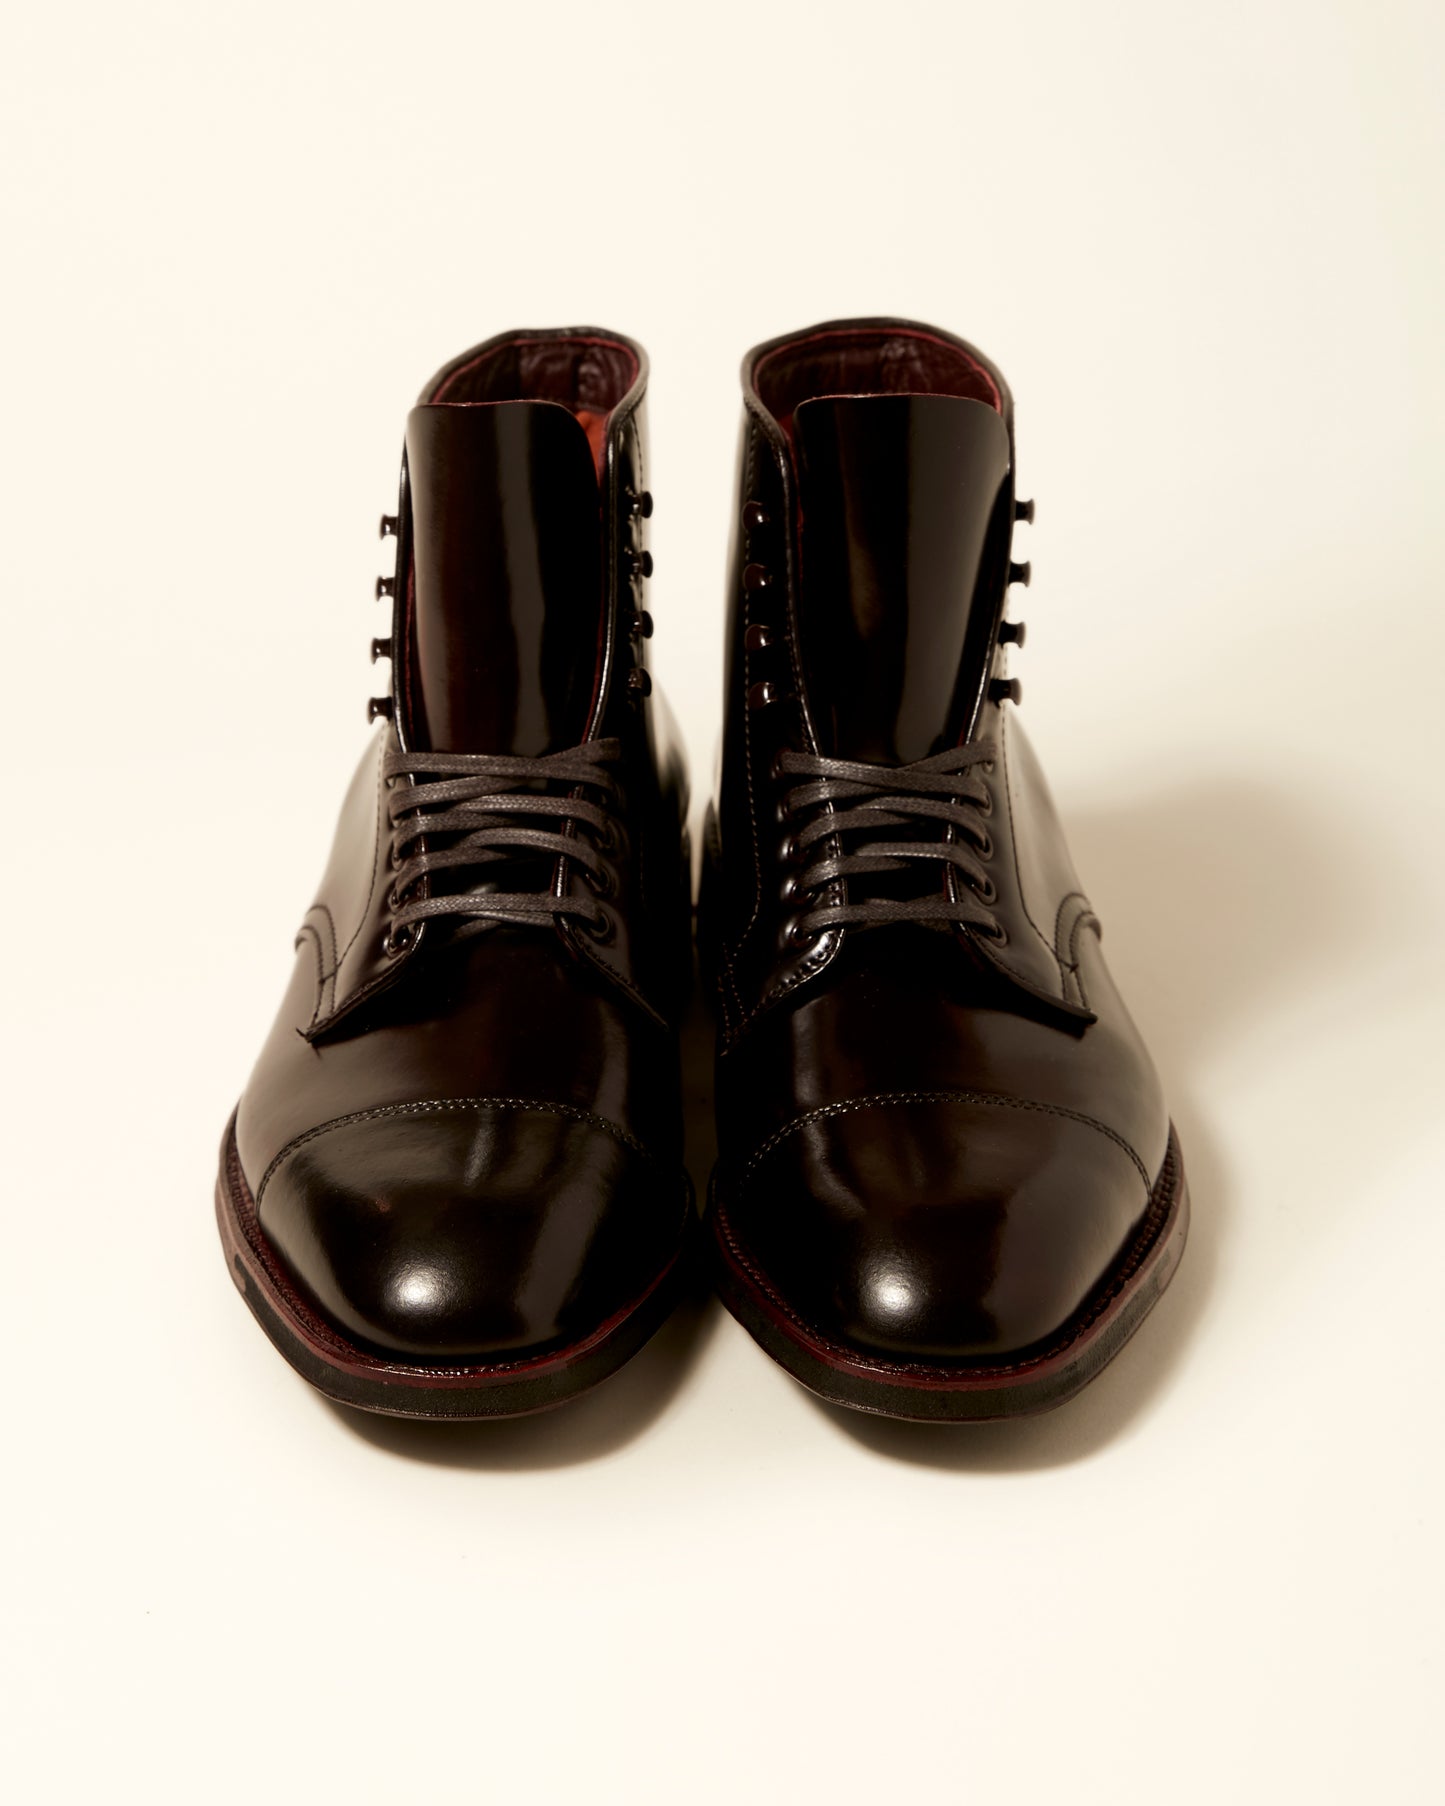 "Gallaway" Straight Tip Boot in Color 8 Shell Cordovan, Plaza Last